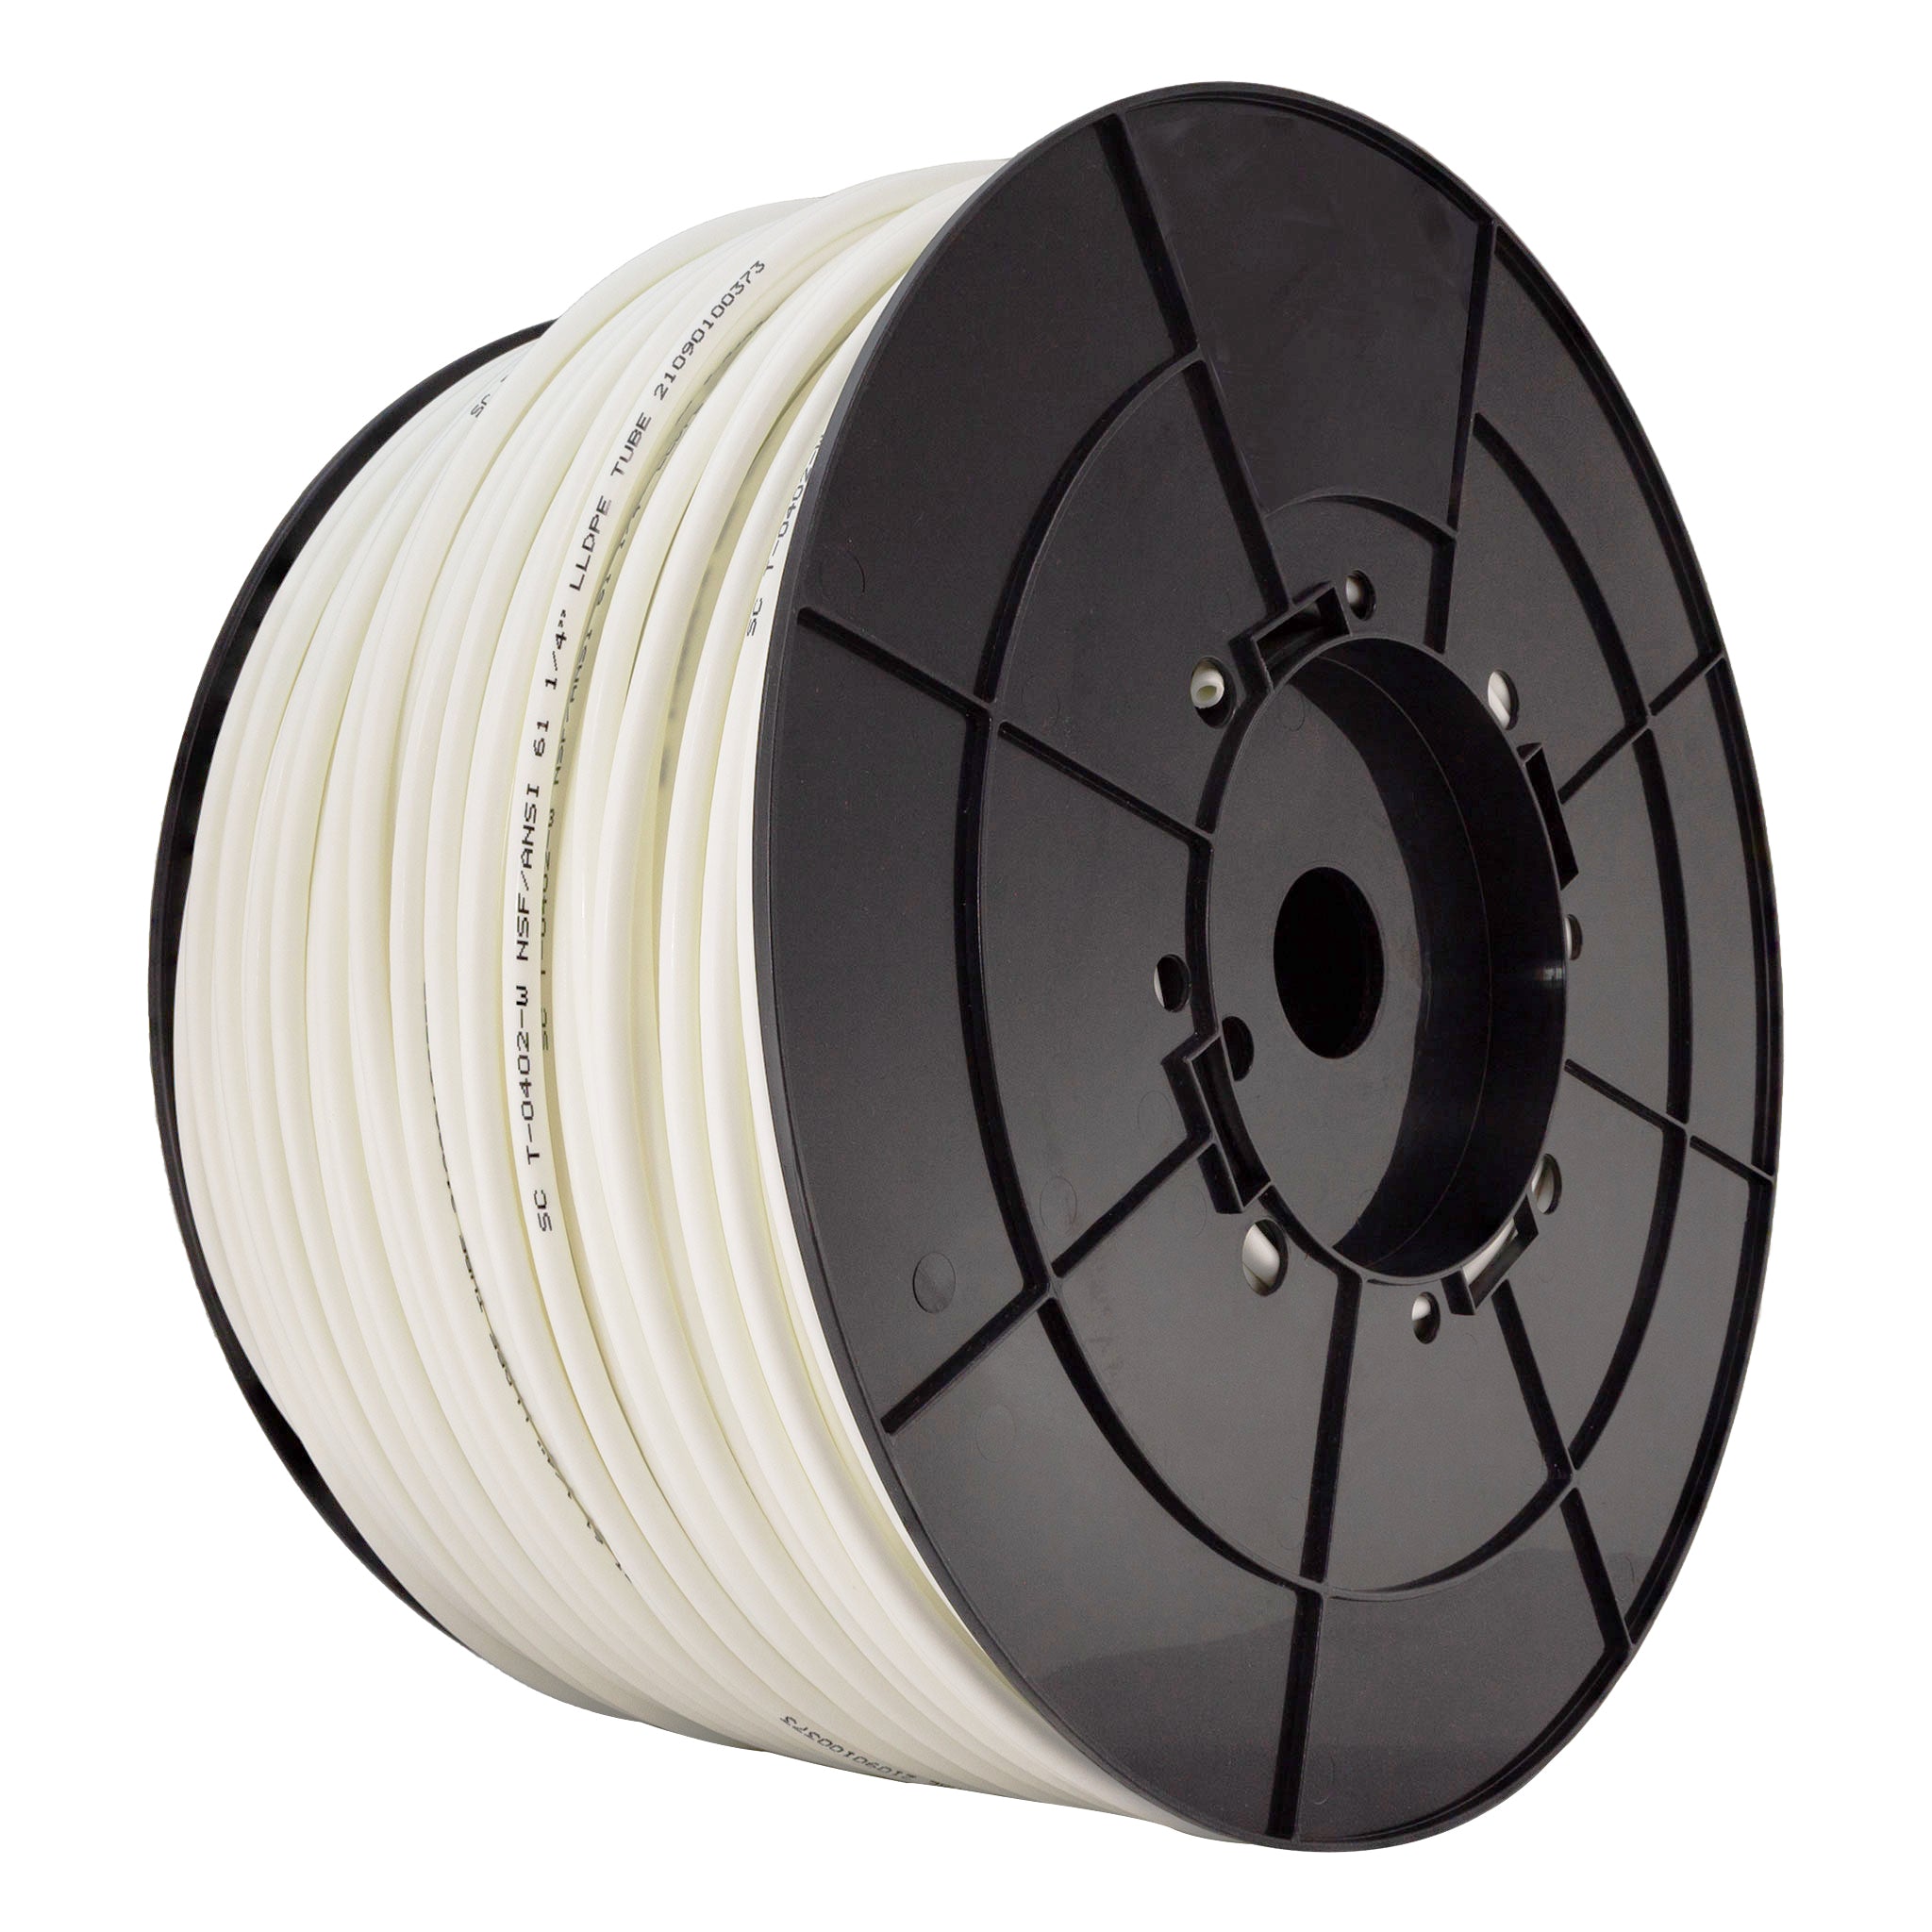 1/4" LLDPE Tube. 1000 FT or 300 M Roll. With spool. White Color. Certified by NSF.